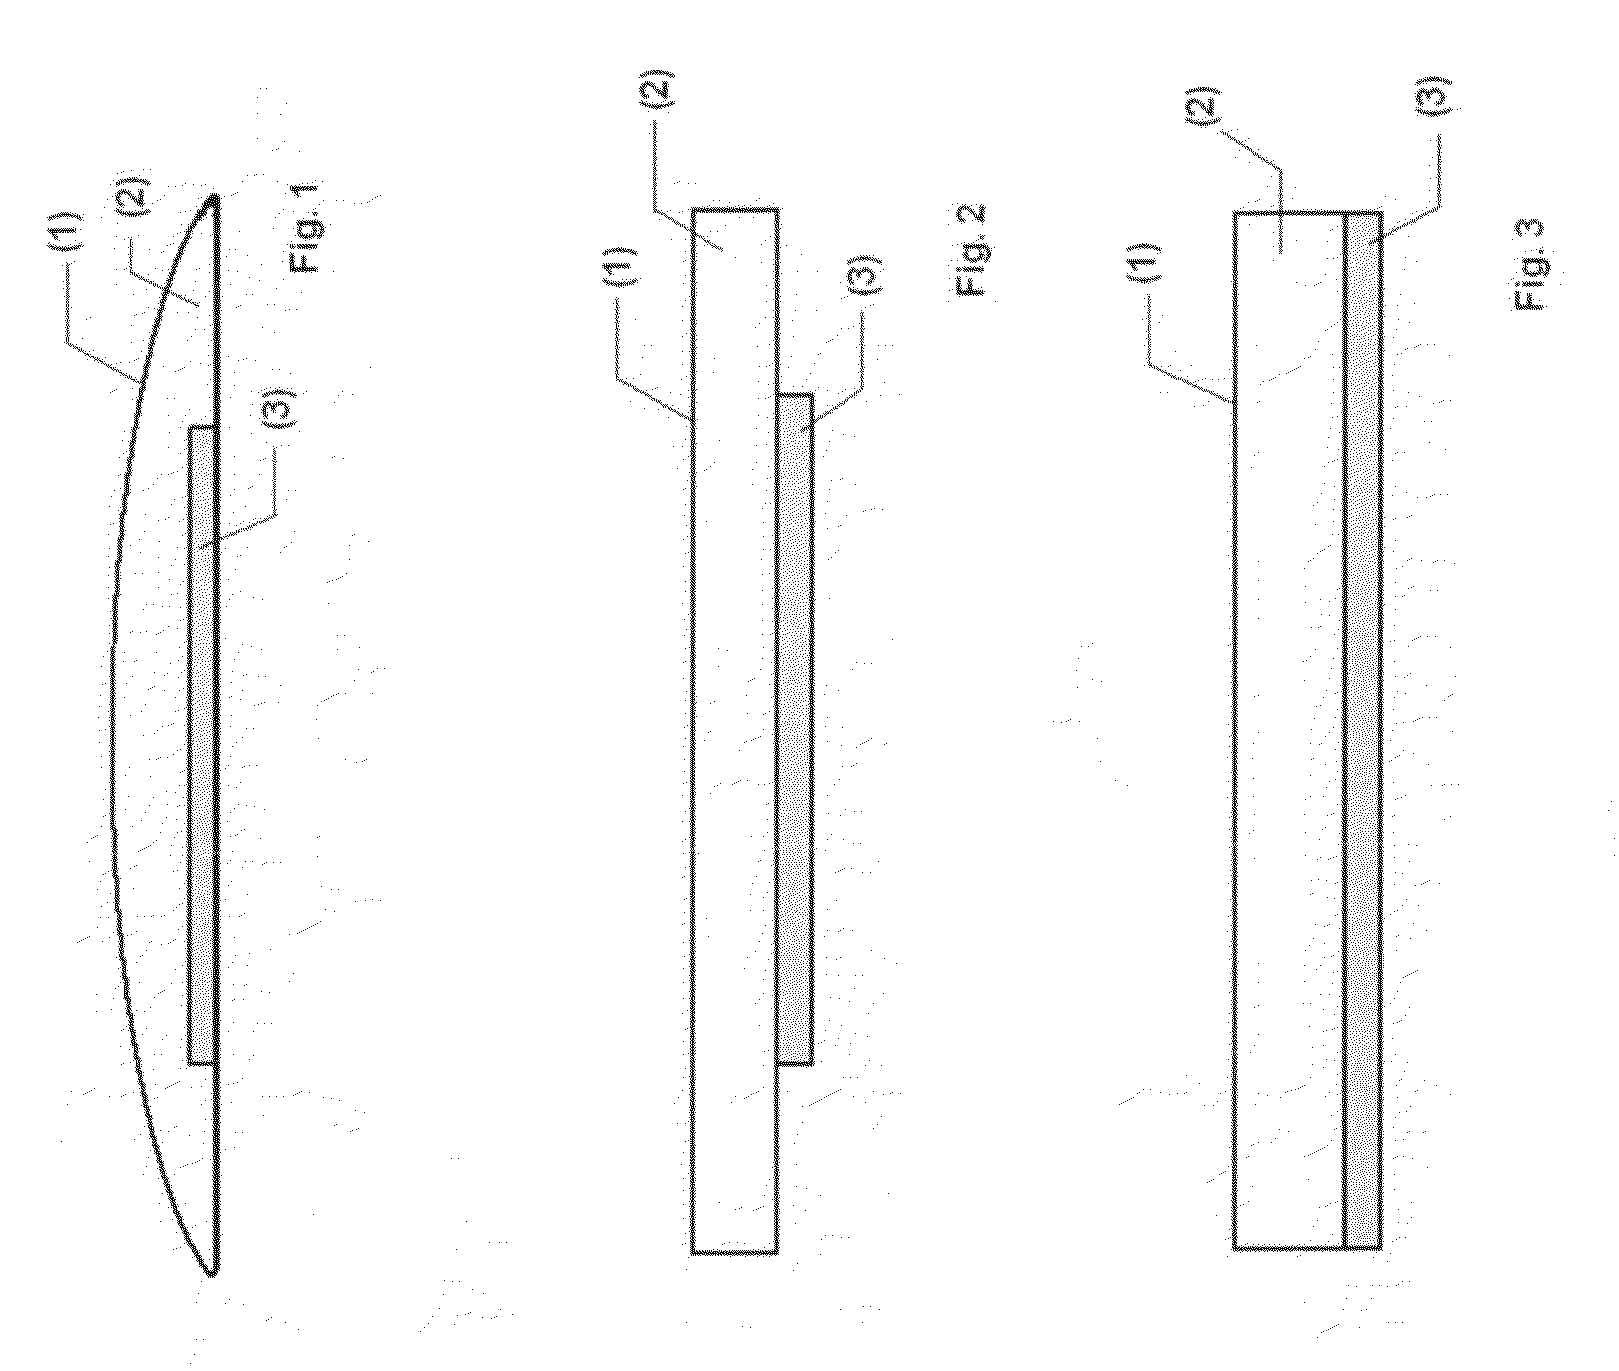 Layered Adhesive Construction With Adhesive Layers Having Different Hydrocolloid Composition